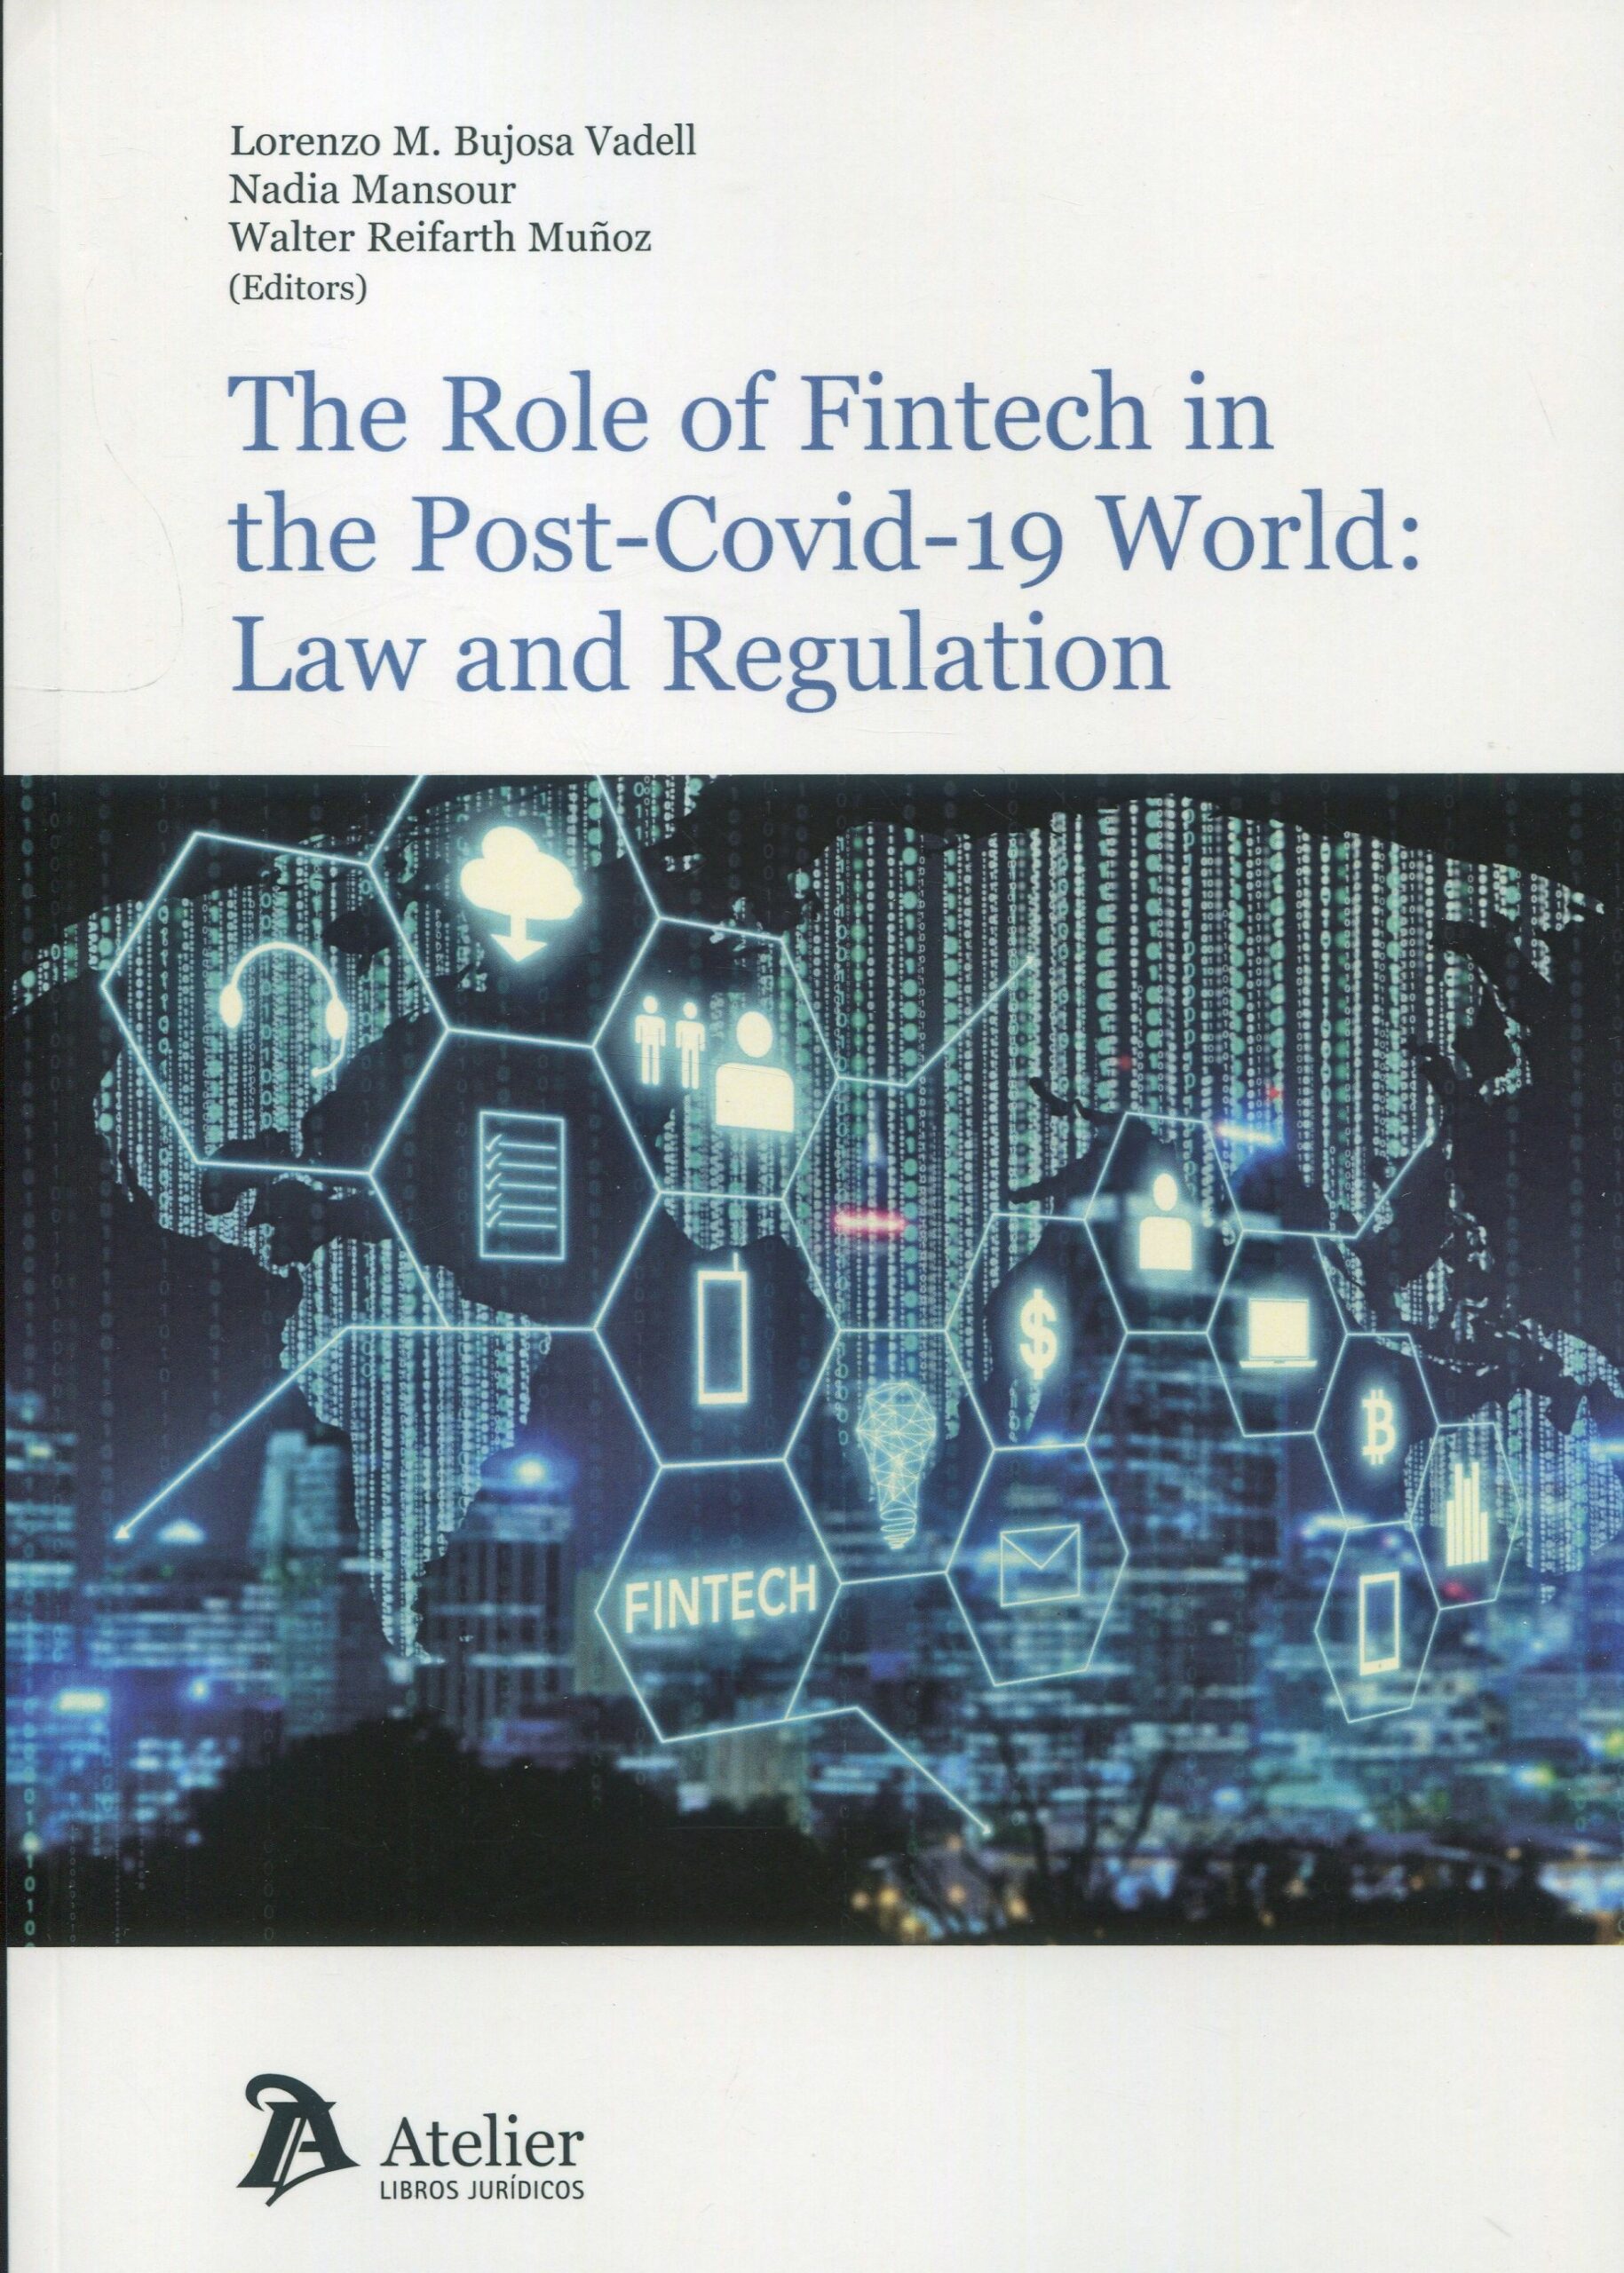 The role of Fintech in the Post-Covid-19 world. 9788418780653